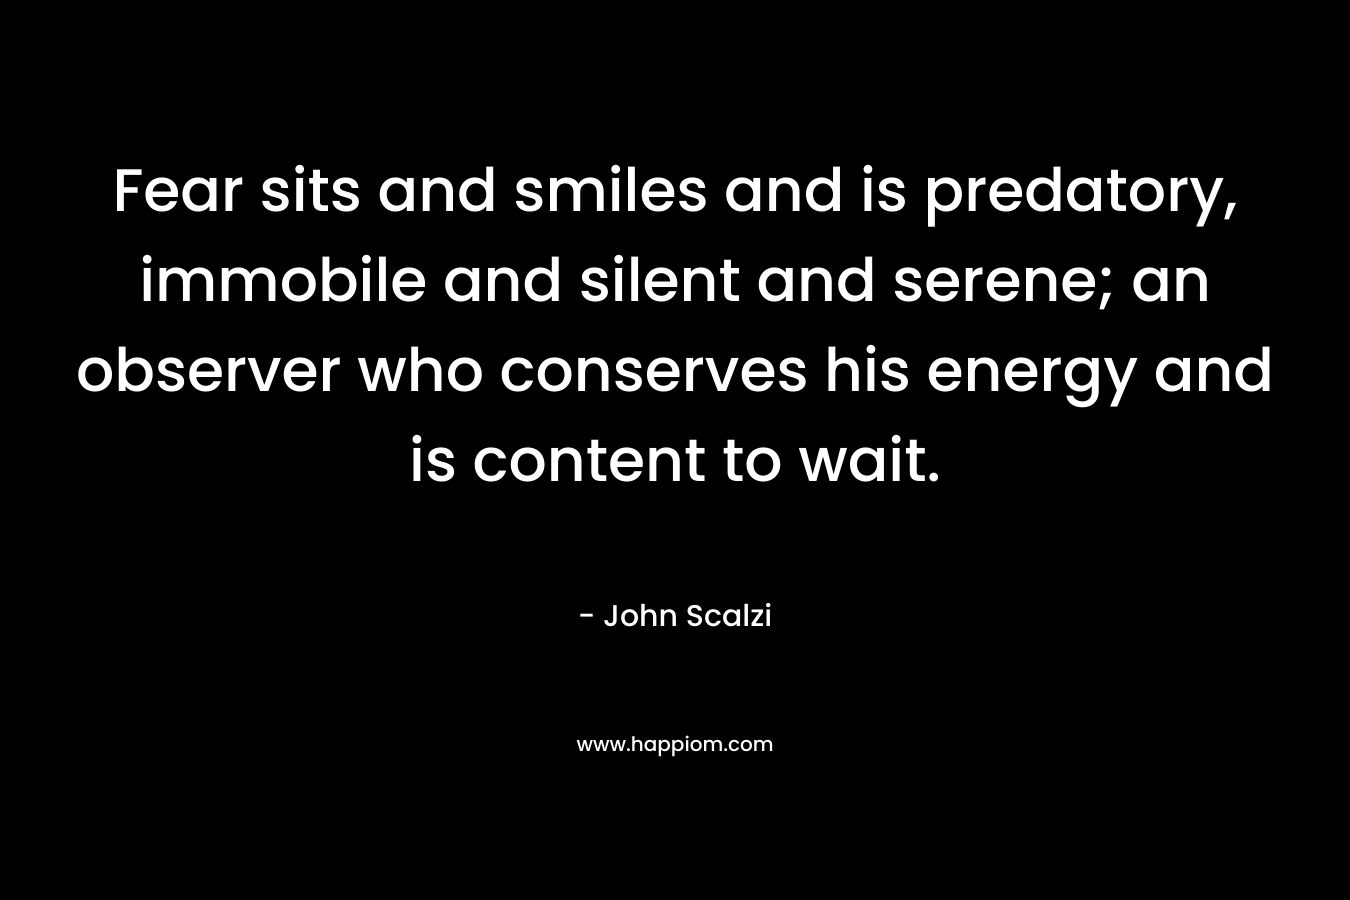 Fear sits and smiles and is predatory, immobile and silent and serene; an observer who conserves his energy and is content to wait. – John Scalzi